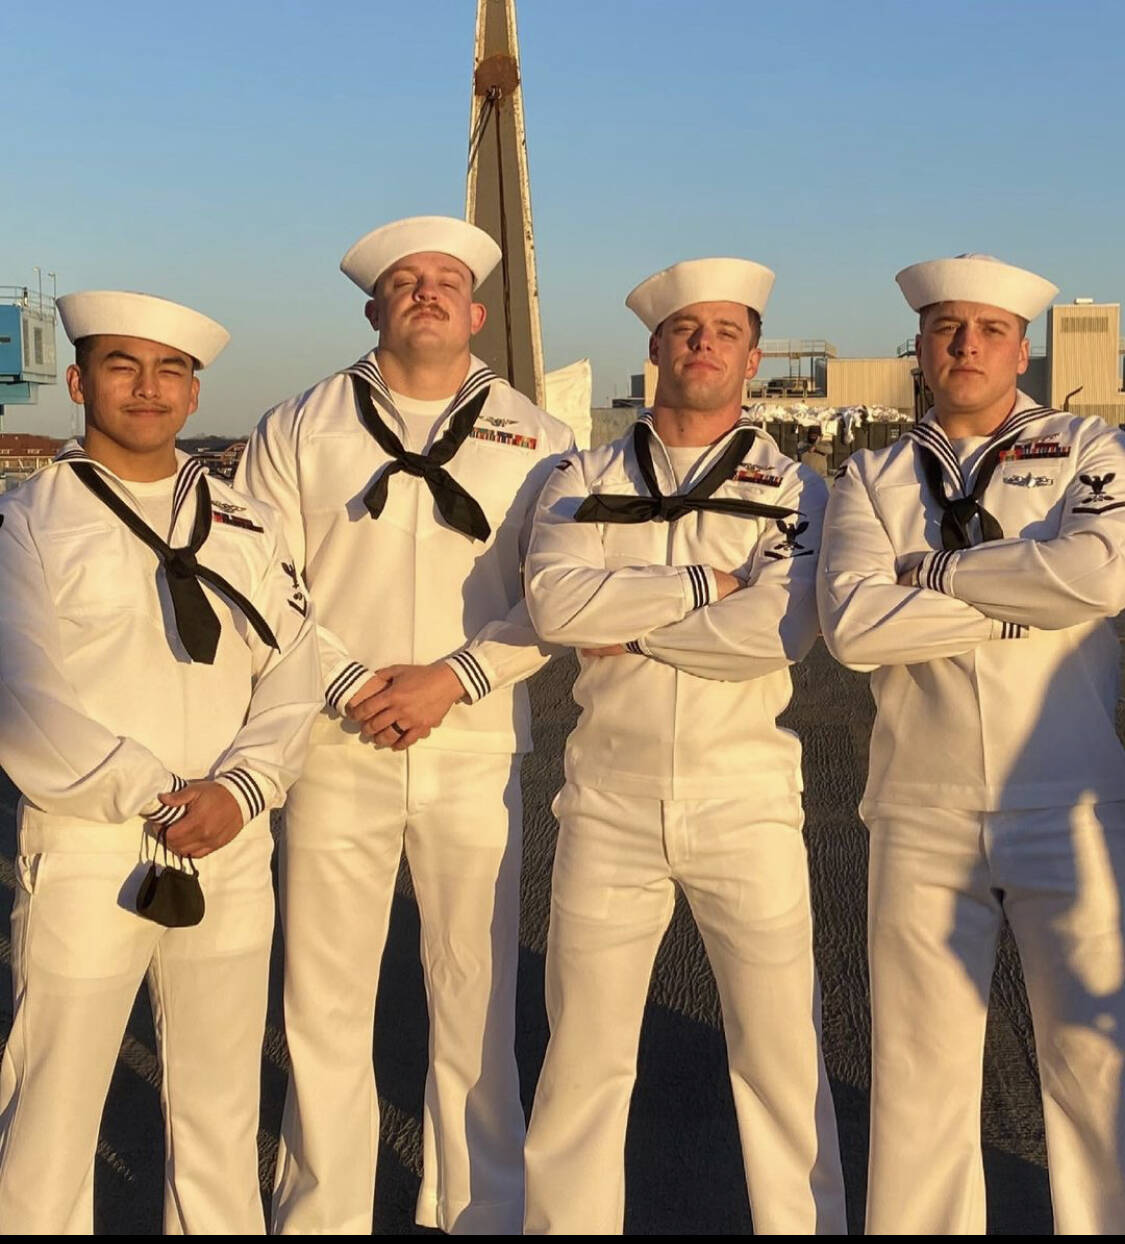 Gabriel Andrews of Mercer Island is pictured second from left. “I hold the Navy in my heart for many reasons, but a large part of it is just saving my life,” said Andrews. (Courtesy photo)